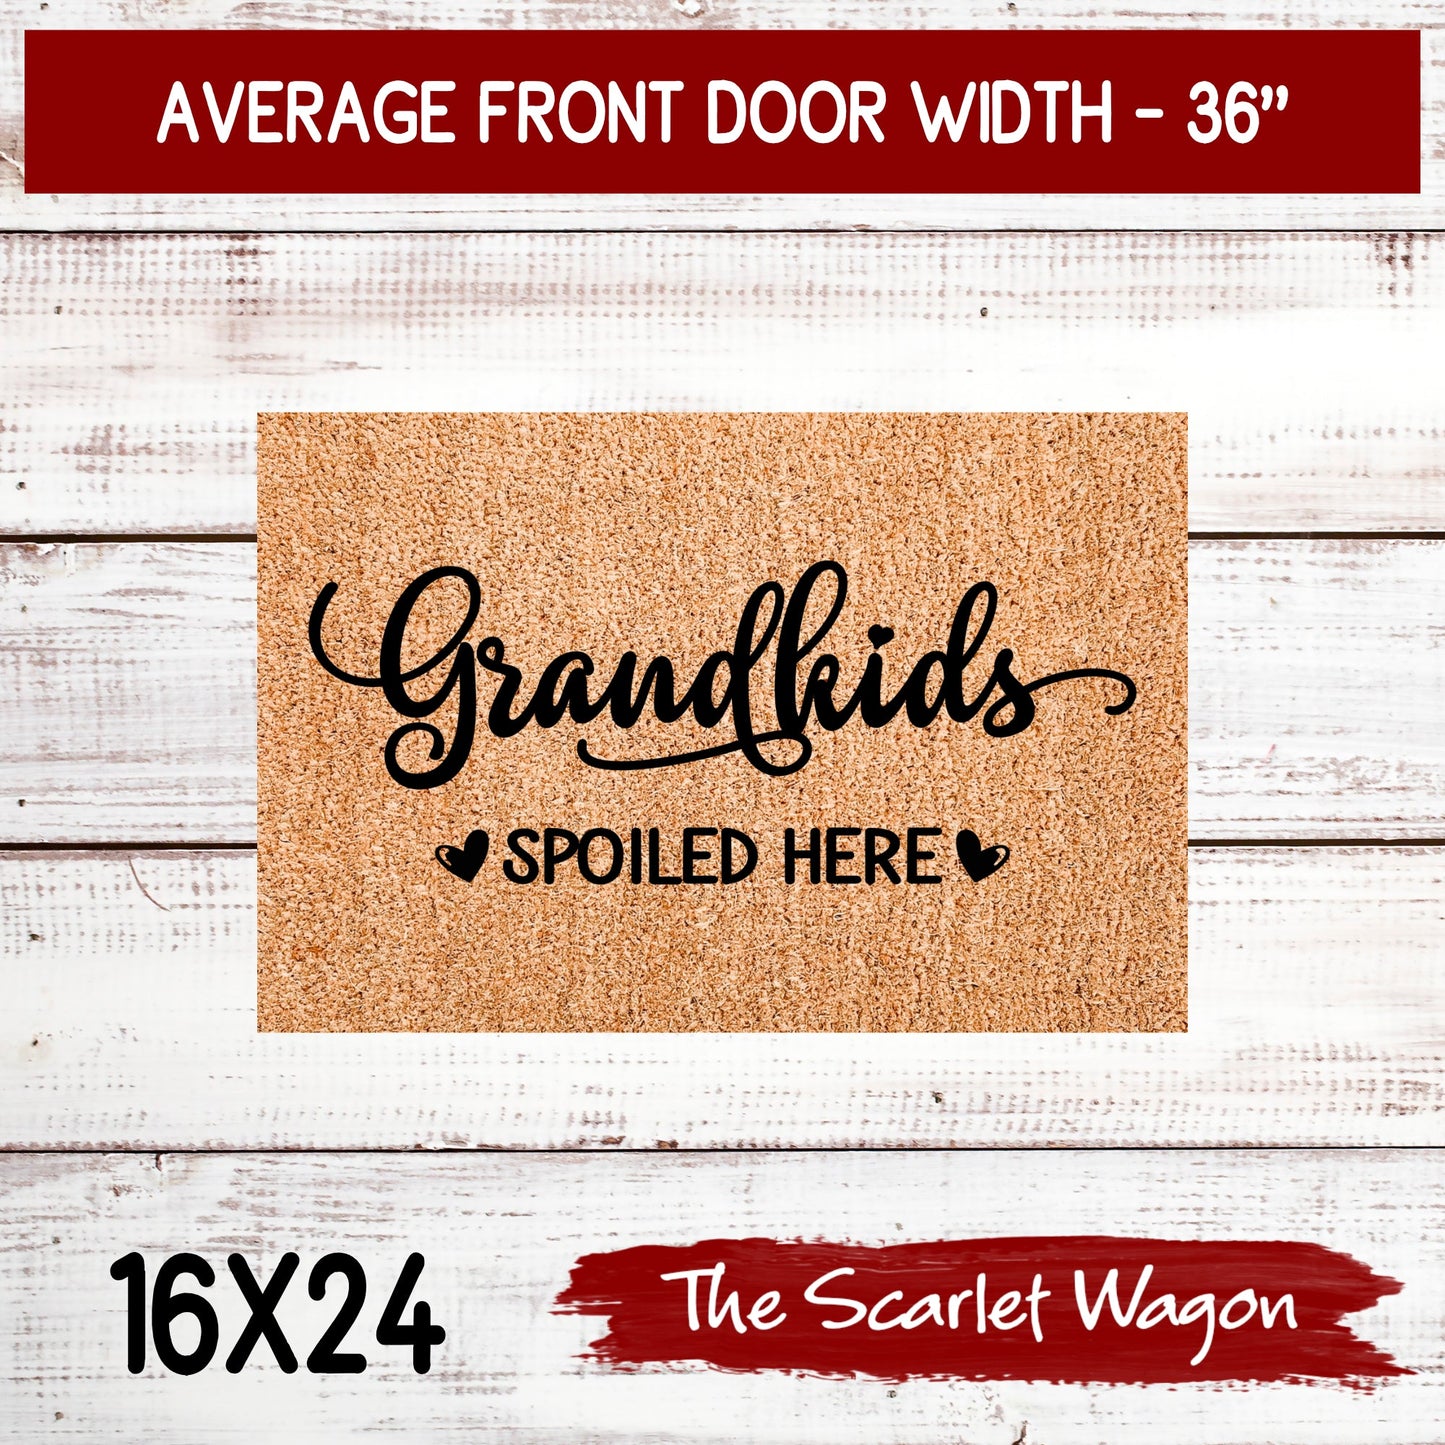 Grandkids Spoiled Here Door Mats teelaunch 16x24 Inches (Free Shipping) 